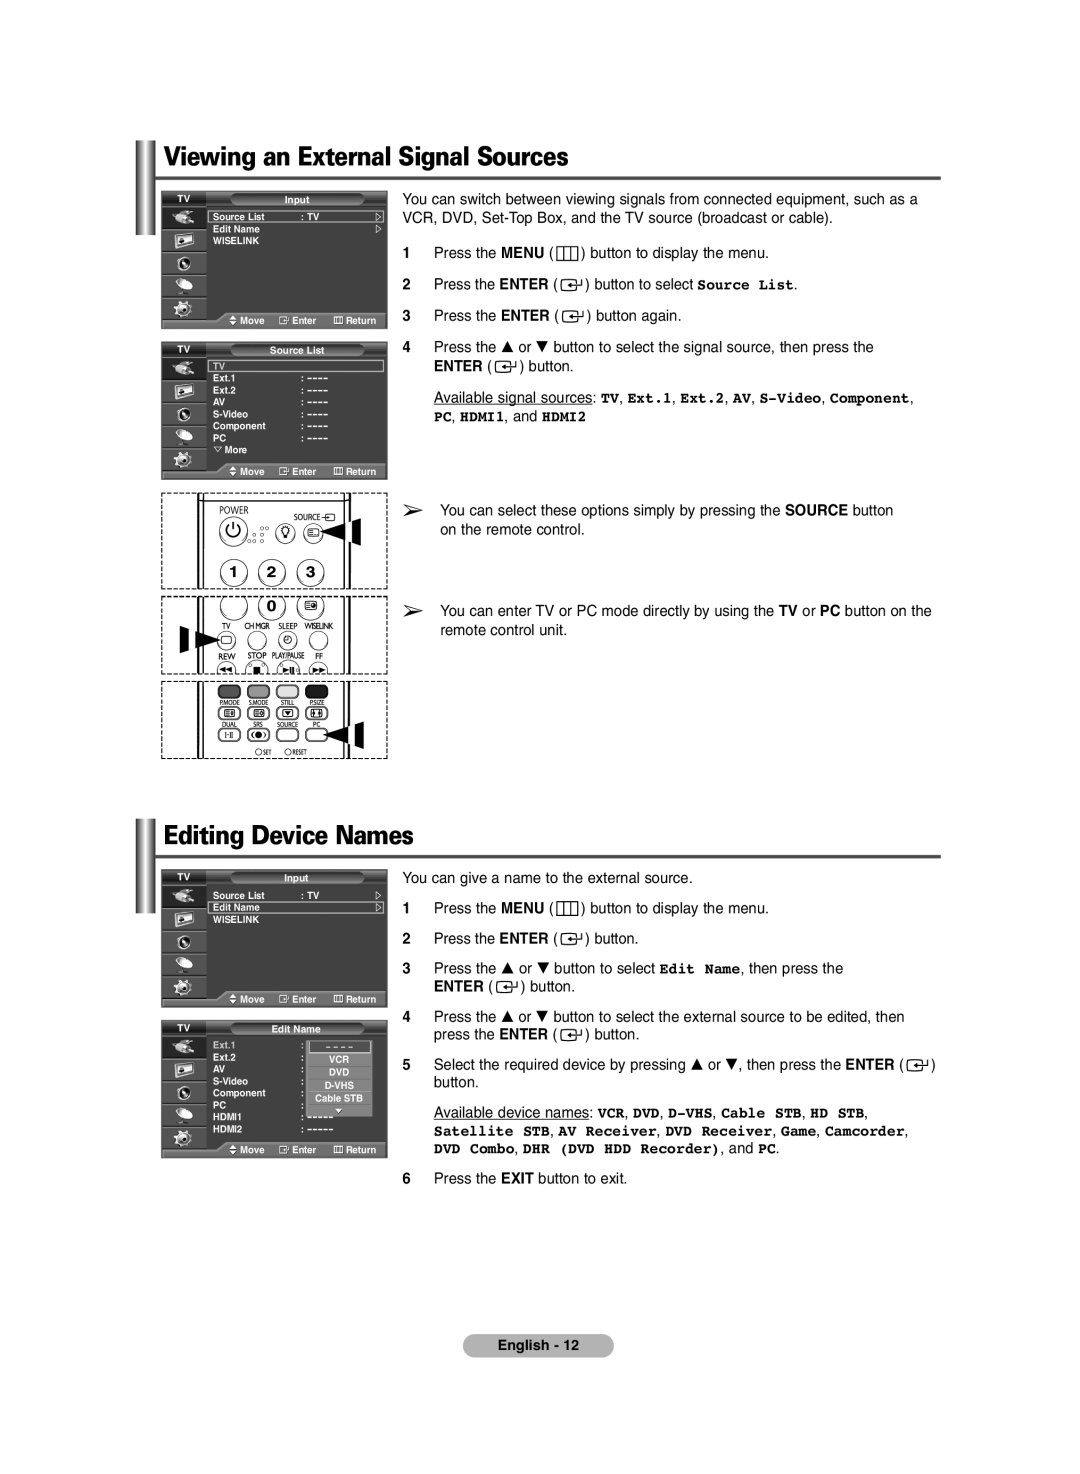 Samsung PDP-TELEVISION manual Viewing an External Signal Sources, Editing Device Names, Ext.1 